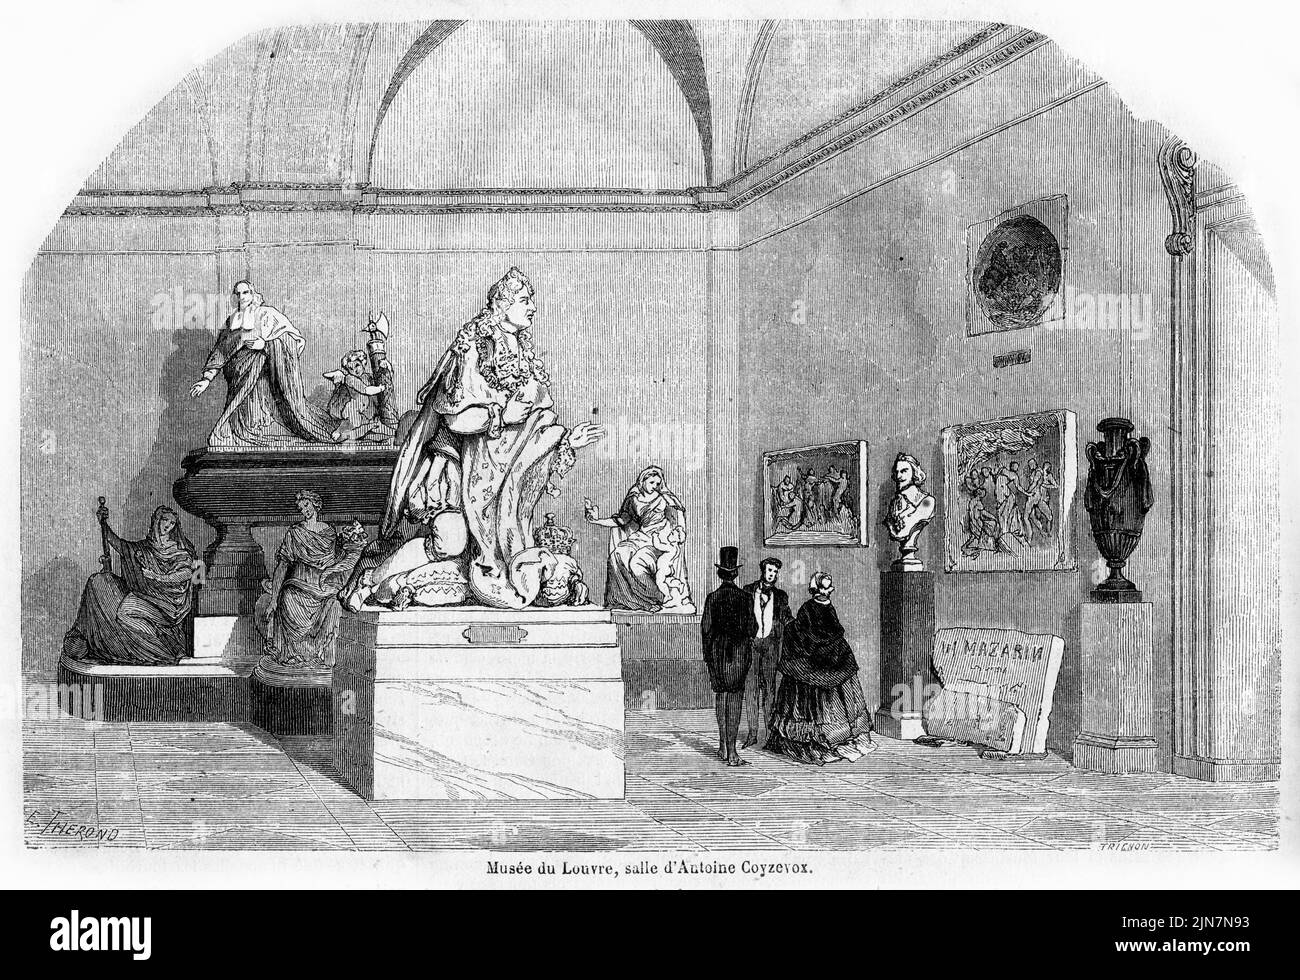 Engraving of the room of sculptor Antoine Coyzevox at the Louvre in Paris, France, circa 1850.  Coysevox was famous for his works displayed at the palace of Versailles. Stock Photo